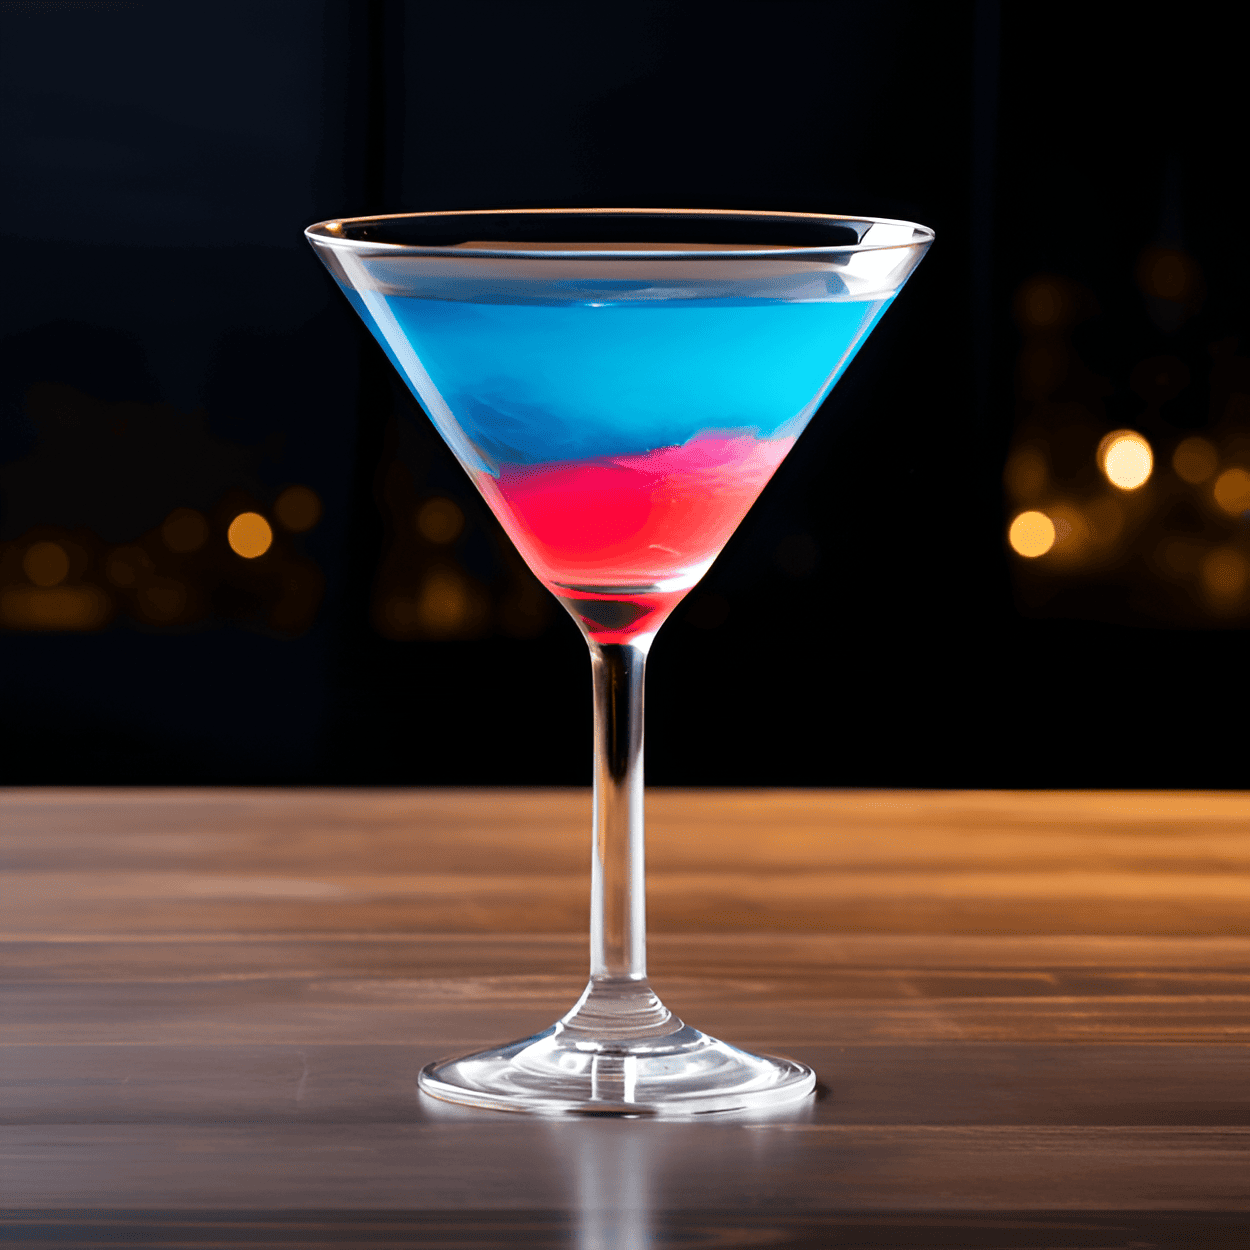 Van Gogh Cocktail Recipe - The Van Gogh cocktail is a refreshing, fruity, and slightly tart drink. It has a well-balanced combination of sweet and sour flavors, with a hint of bitterness from the orange liqueur. The overall taste is smooth, light, and easy to drink.